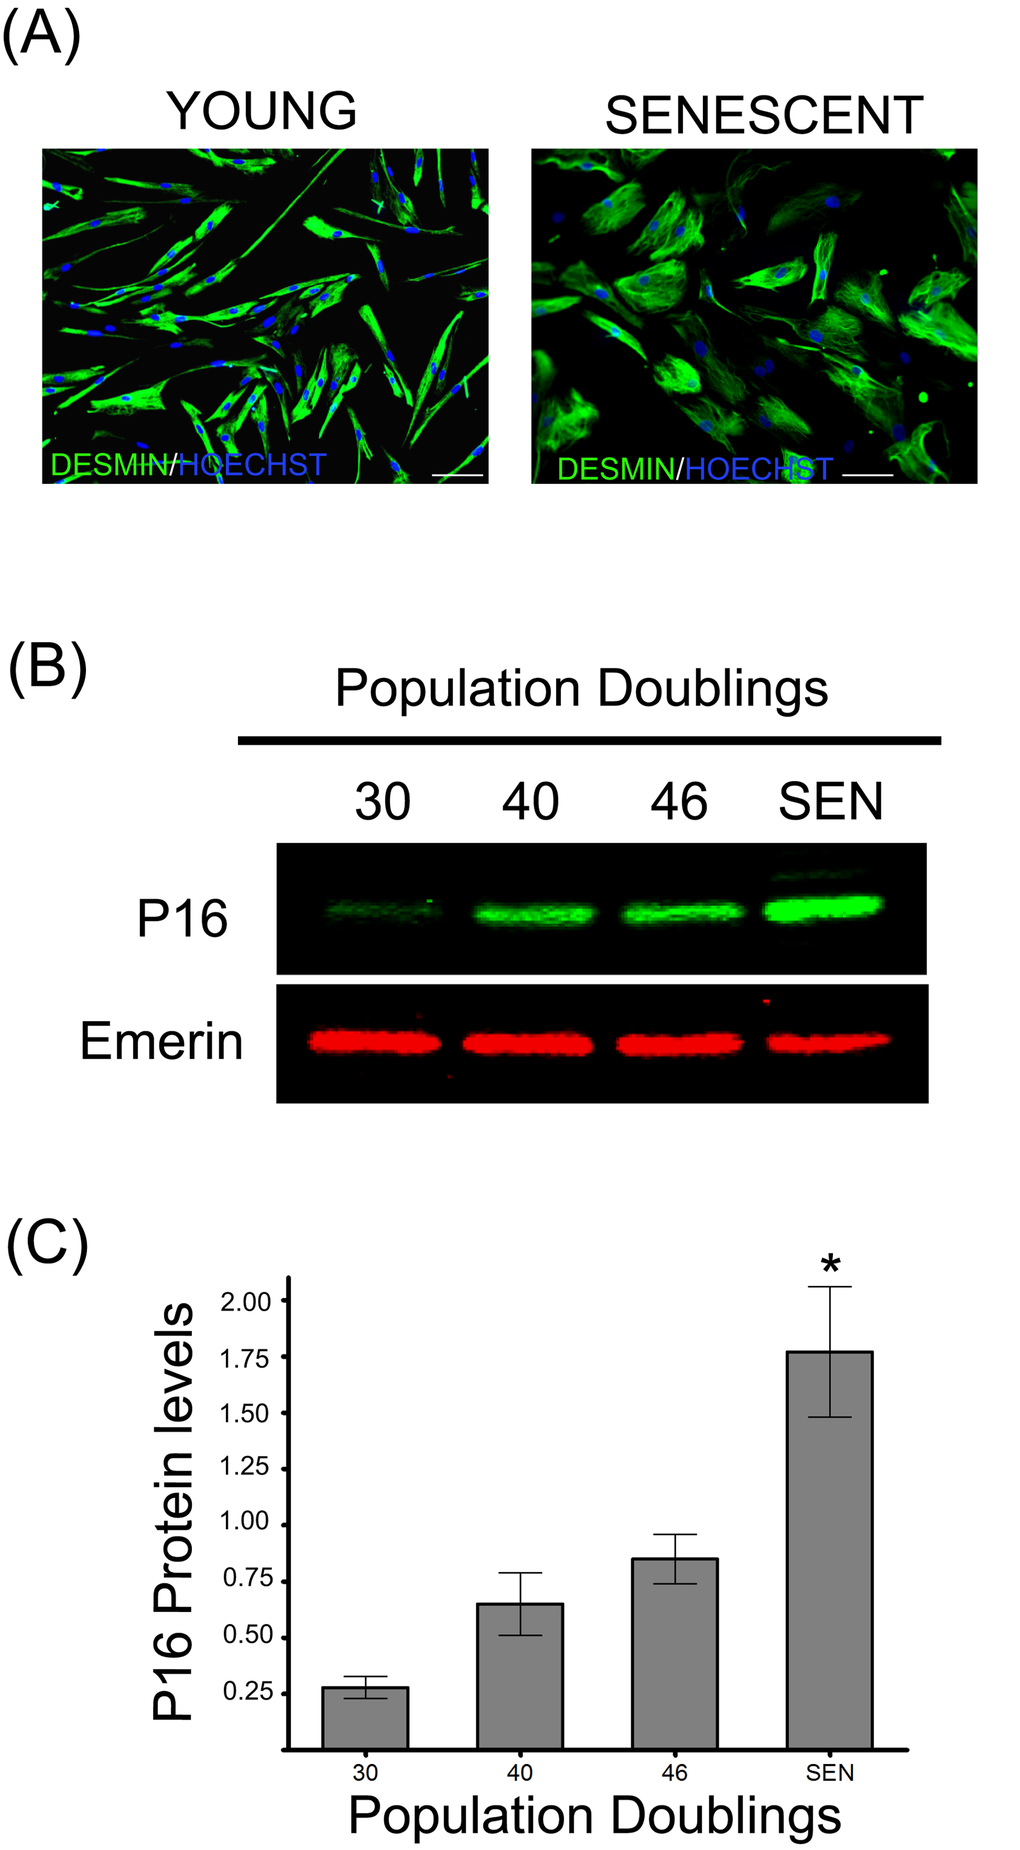 Replicative senescence of human satellite cells in vitro. (A) Immunocytochemistry against desmin evidences morphological changes in senescent human myoblasts (SEN) when compared to young cells (CPD 30). Note the increased diameter and irregular shapes of the formers, as previously described [13]. (B) p16 protein levels during replicative senescence in human myoblasts. (C) Densitometric analysis of the p16/emerin ratio showed a significant increase (n=3; *P